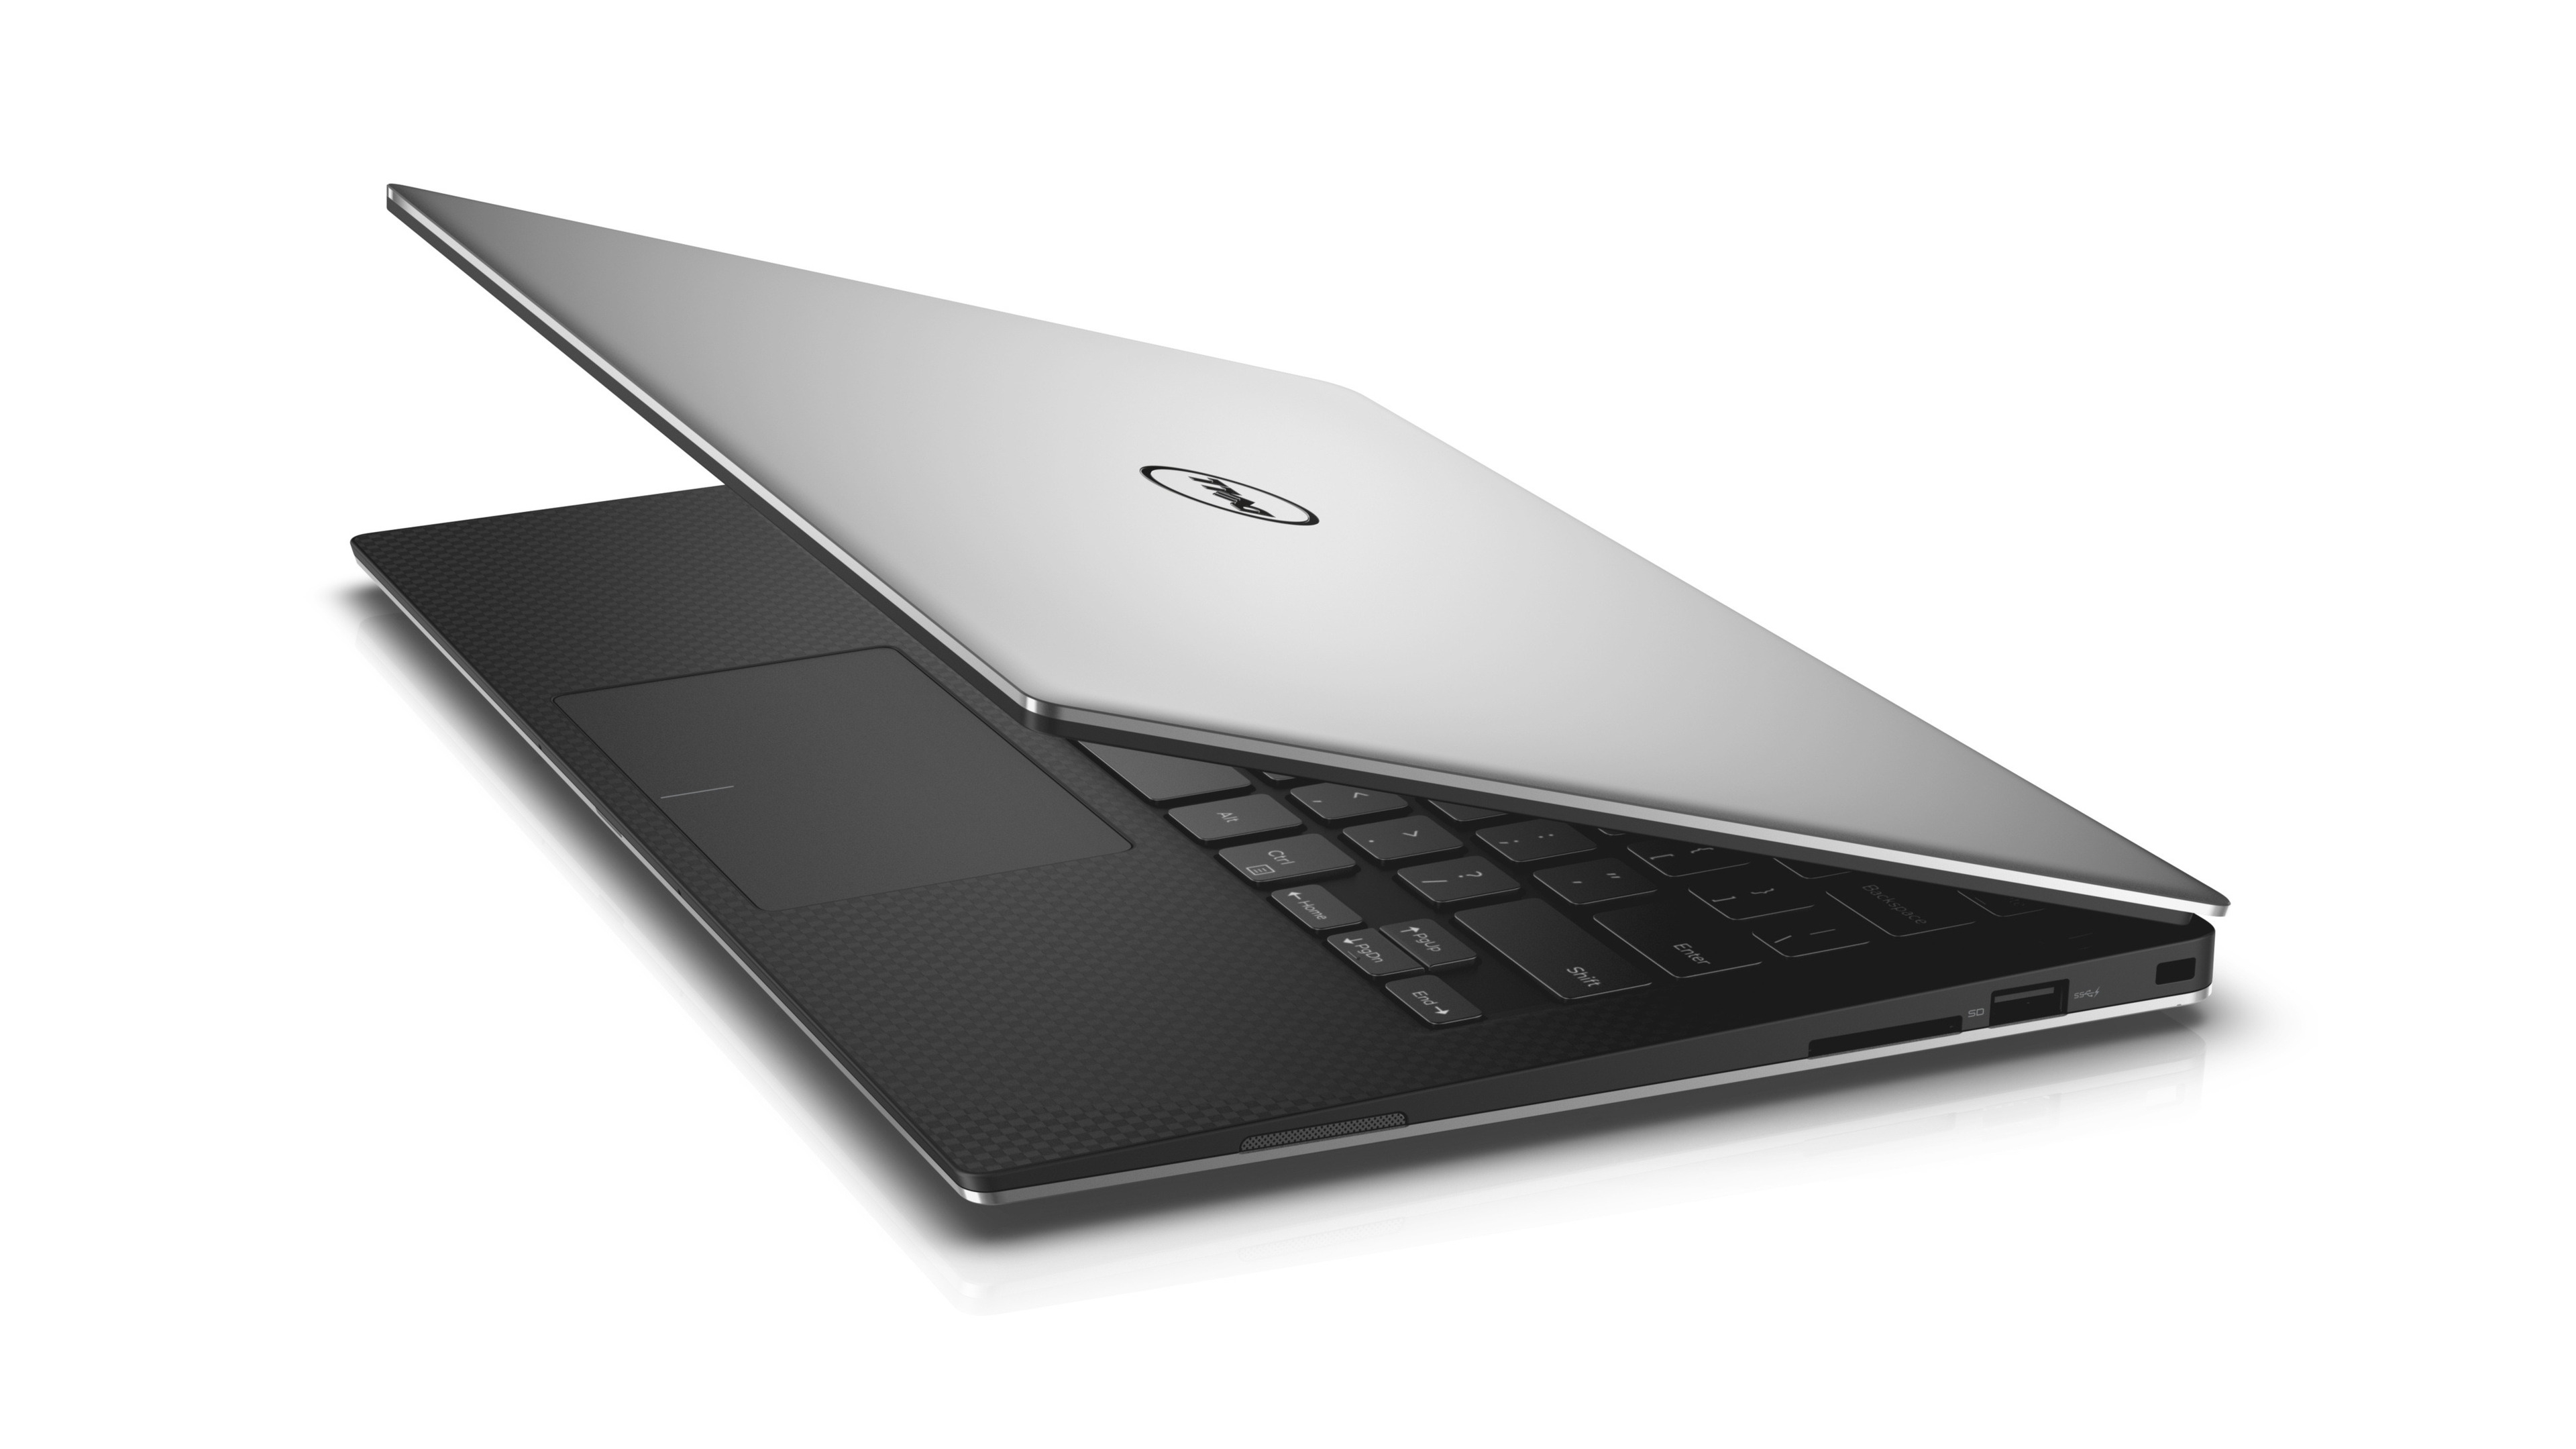 New Dell XPS 13 2015 for 3840 x 2160 Ultra HD resolution